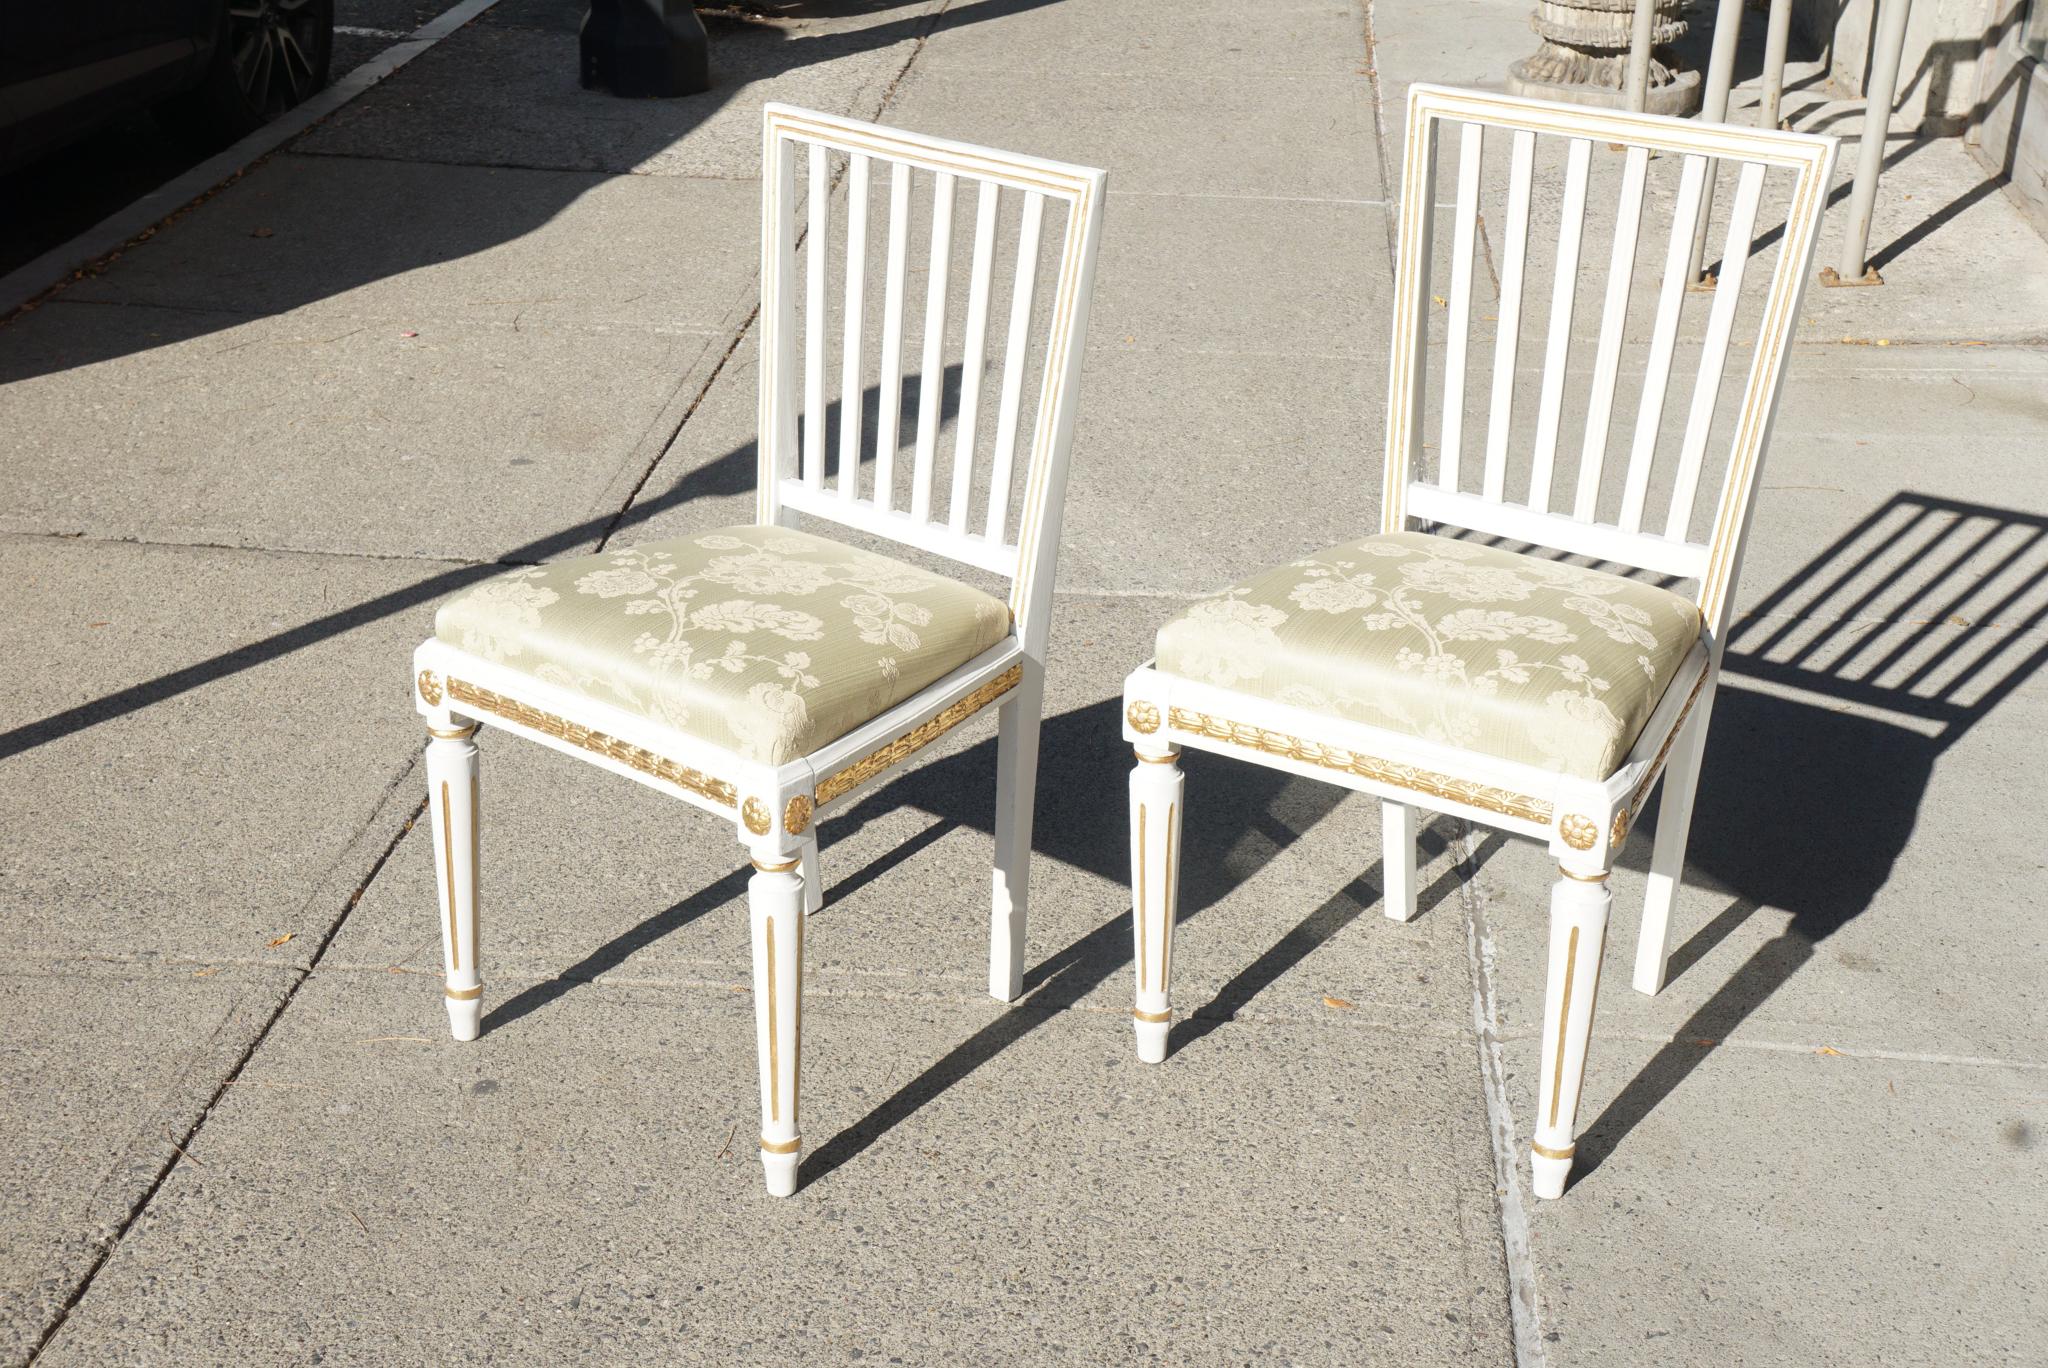 This pair of nice old side chairs are of the period called Gustavian. This correlates to that time in Sweden between 1772 and 1809. These chairs were made circa 1790 and are typical of the furniture production found throughout Sweden and Finland at